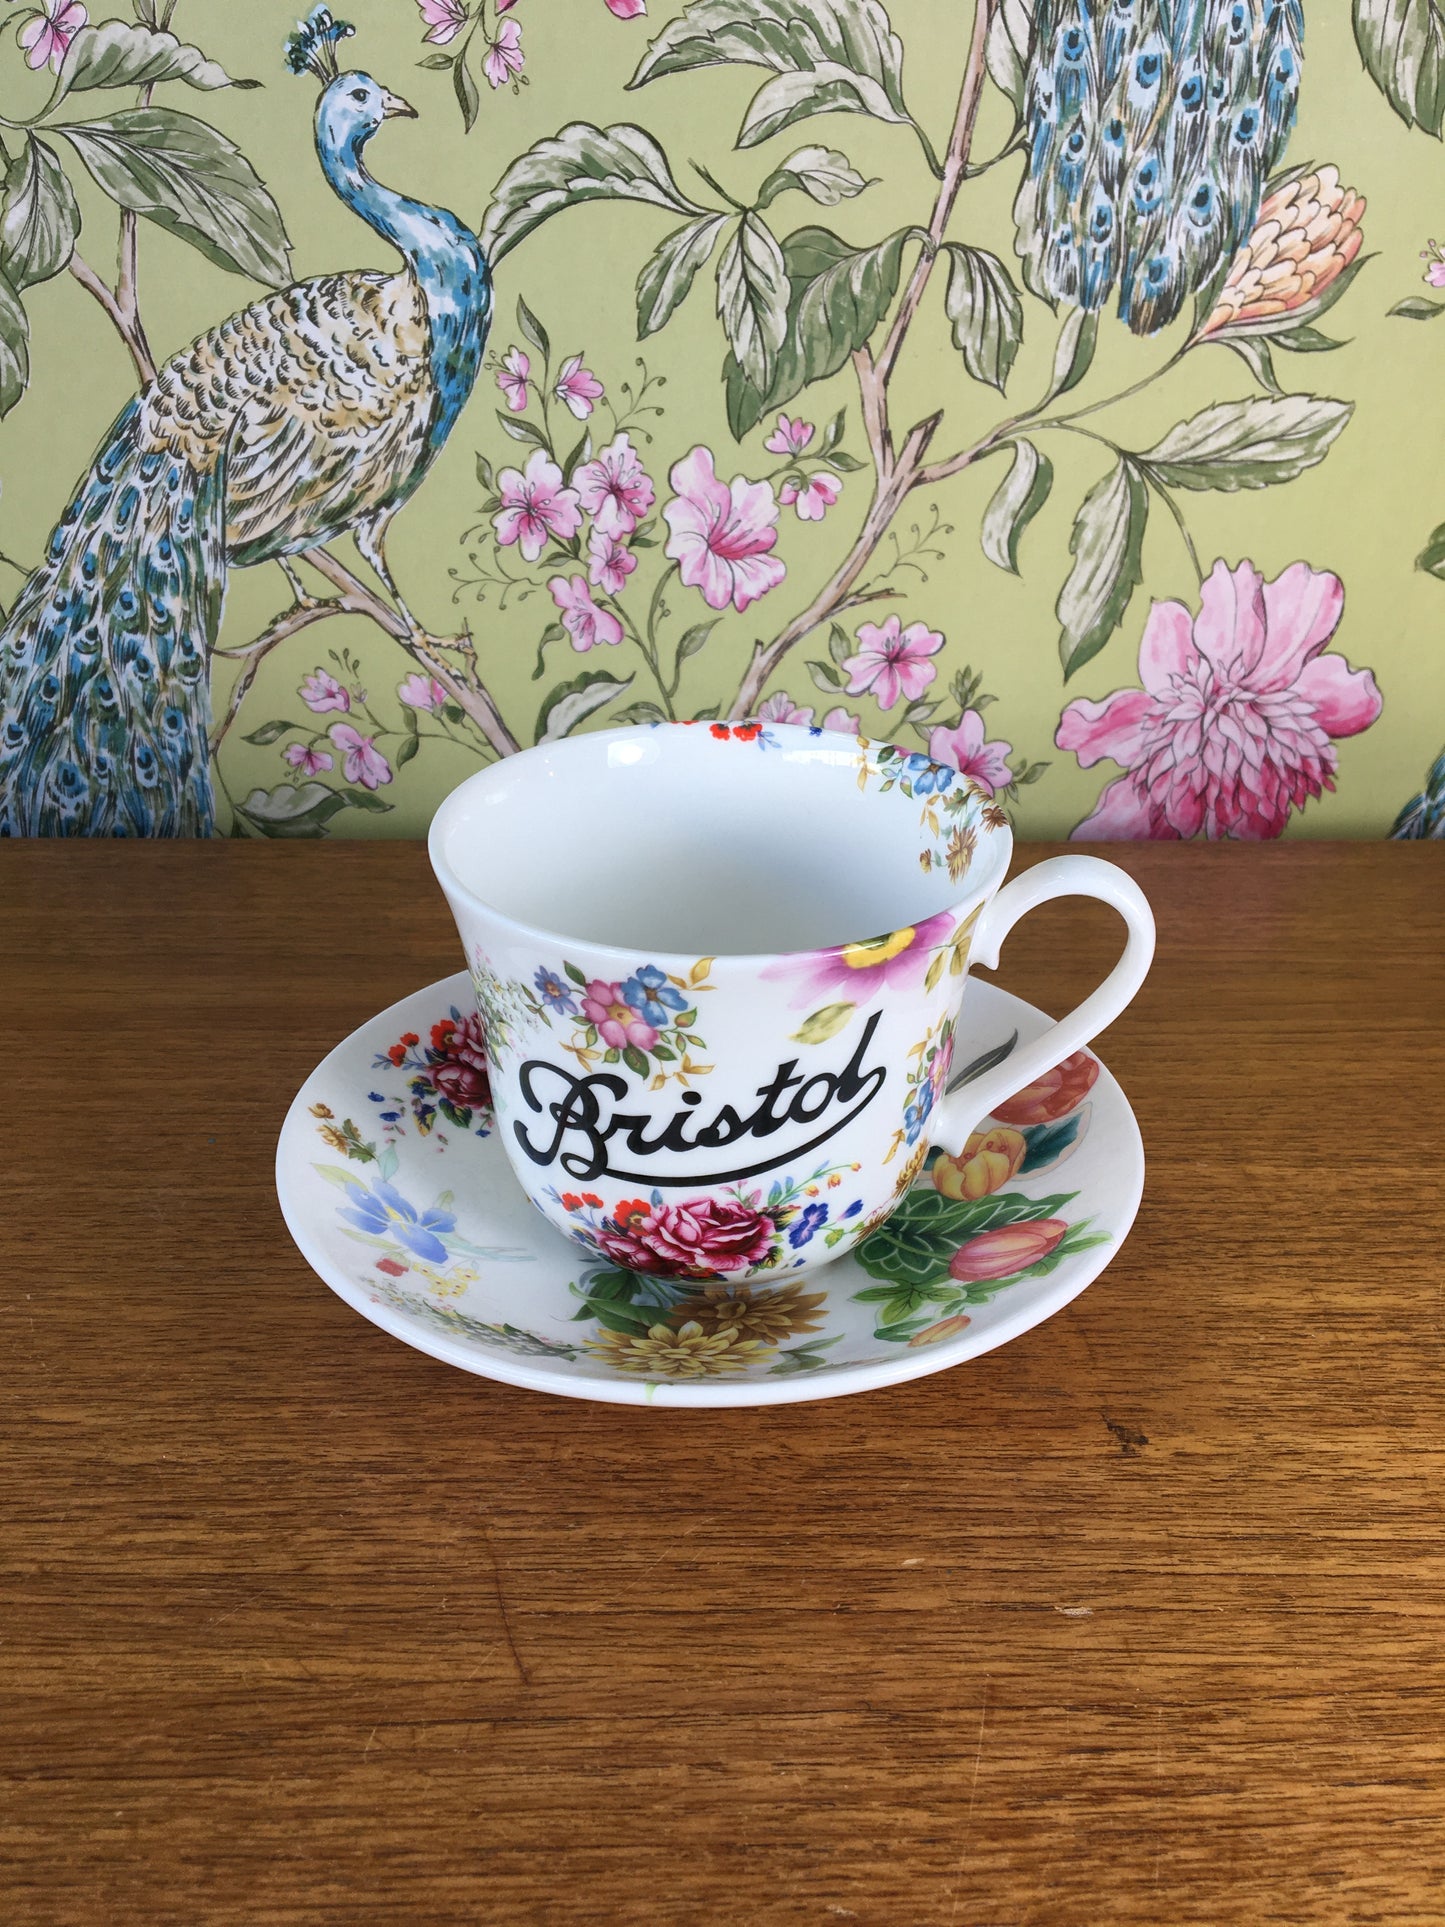 Stokes Croft China Floral Bristol Breakfast Cup & Saucer